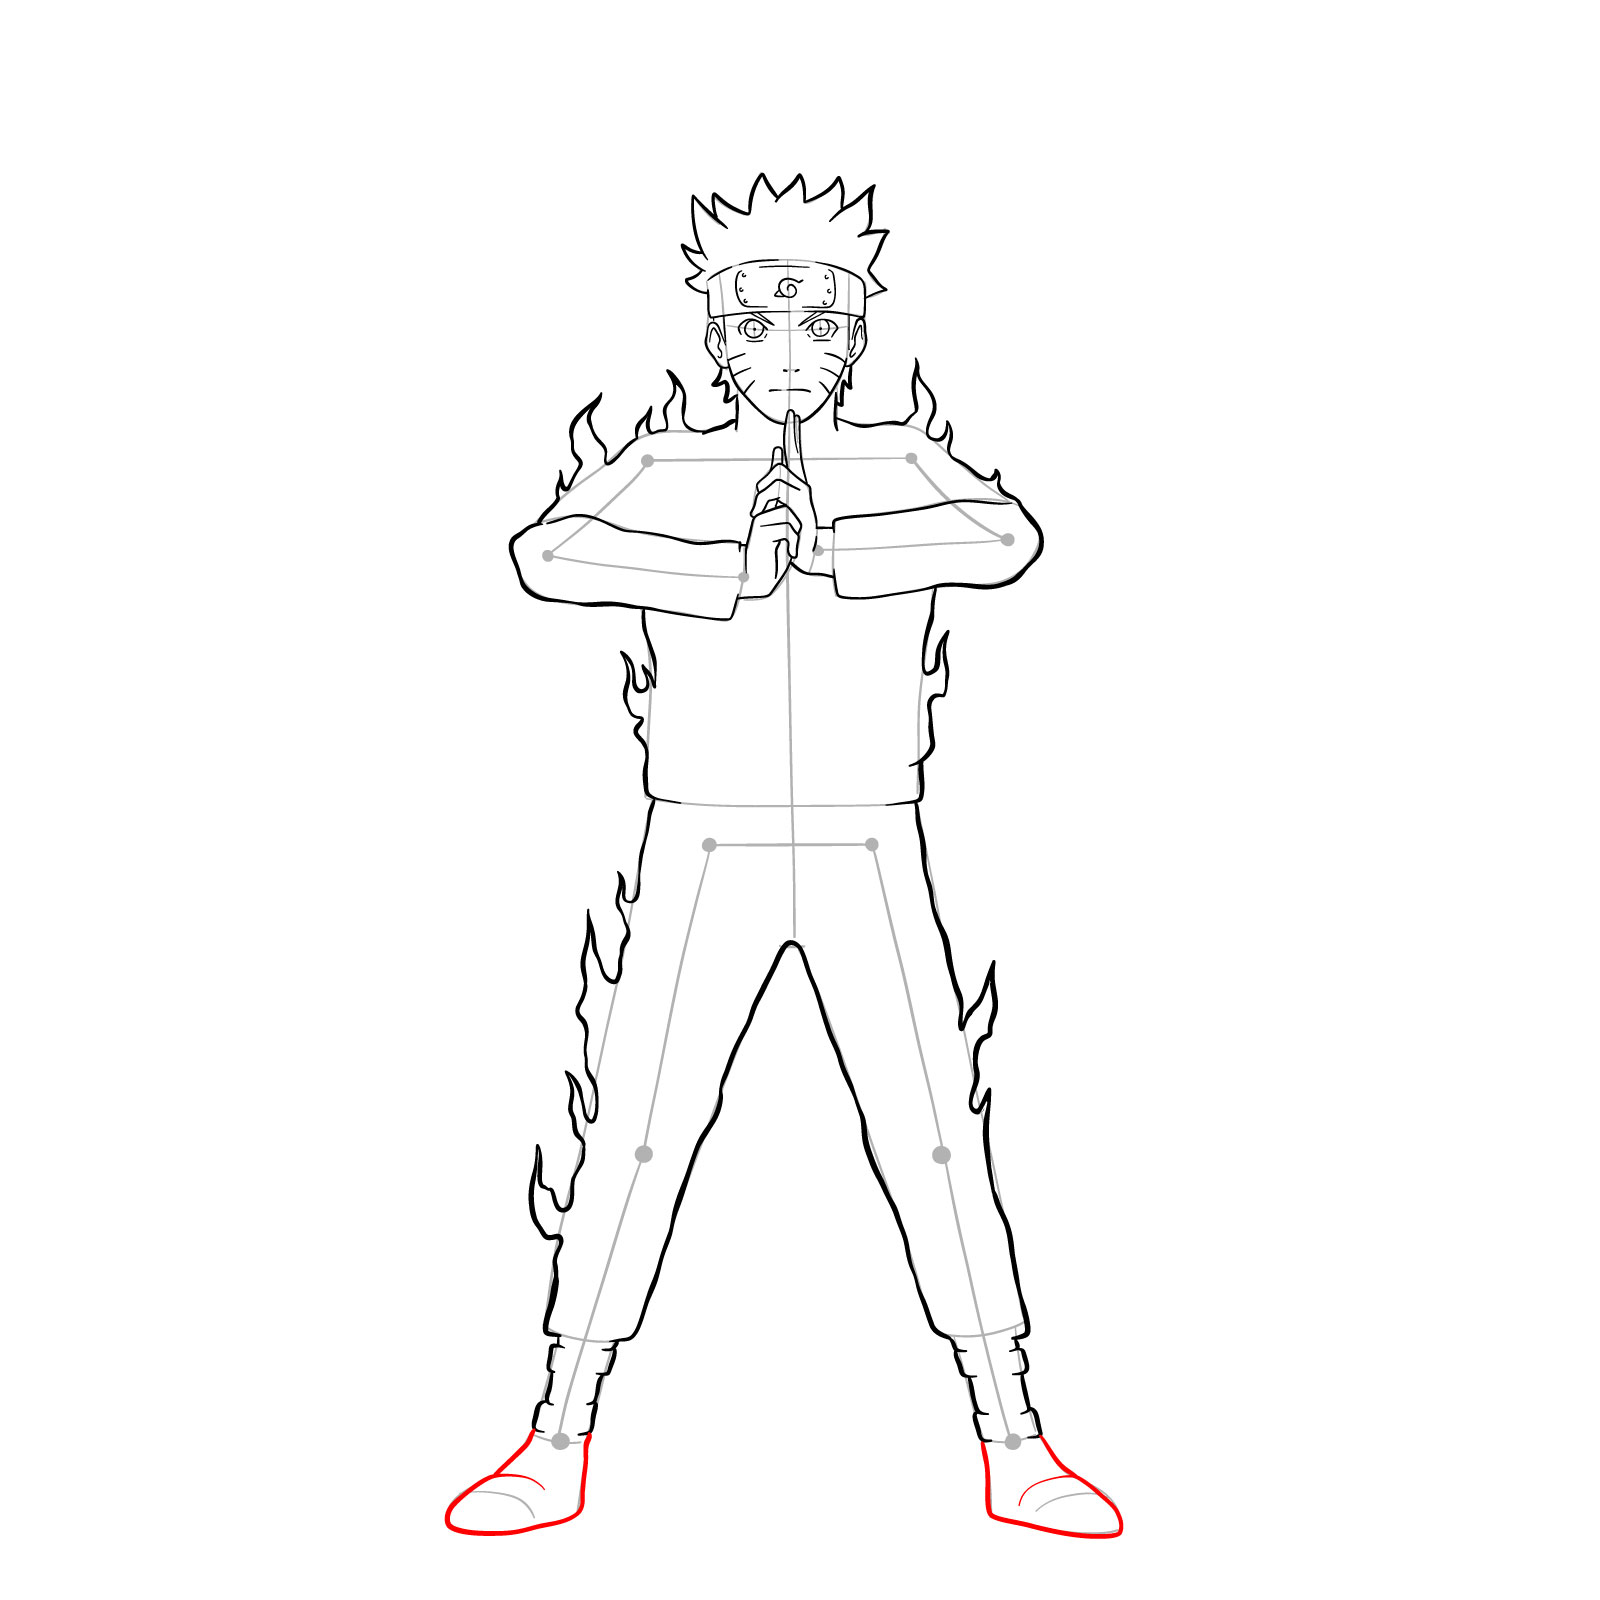 How to draw Naruto in Nine-Tails Chakra Mode - step 26